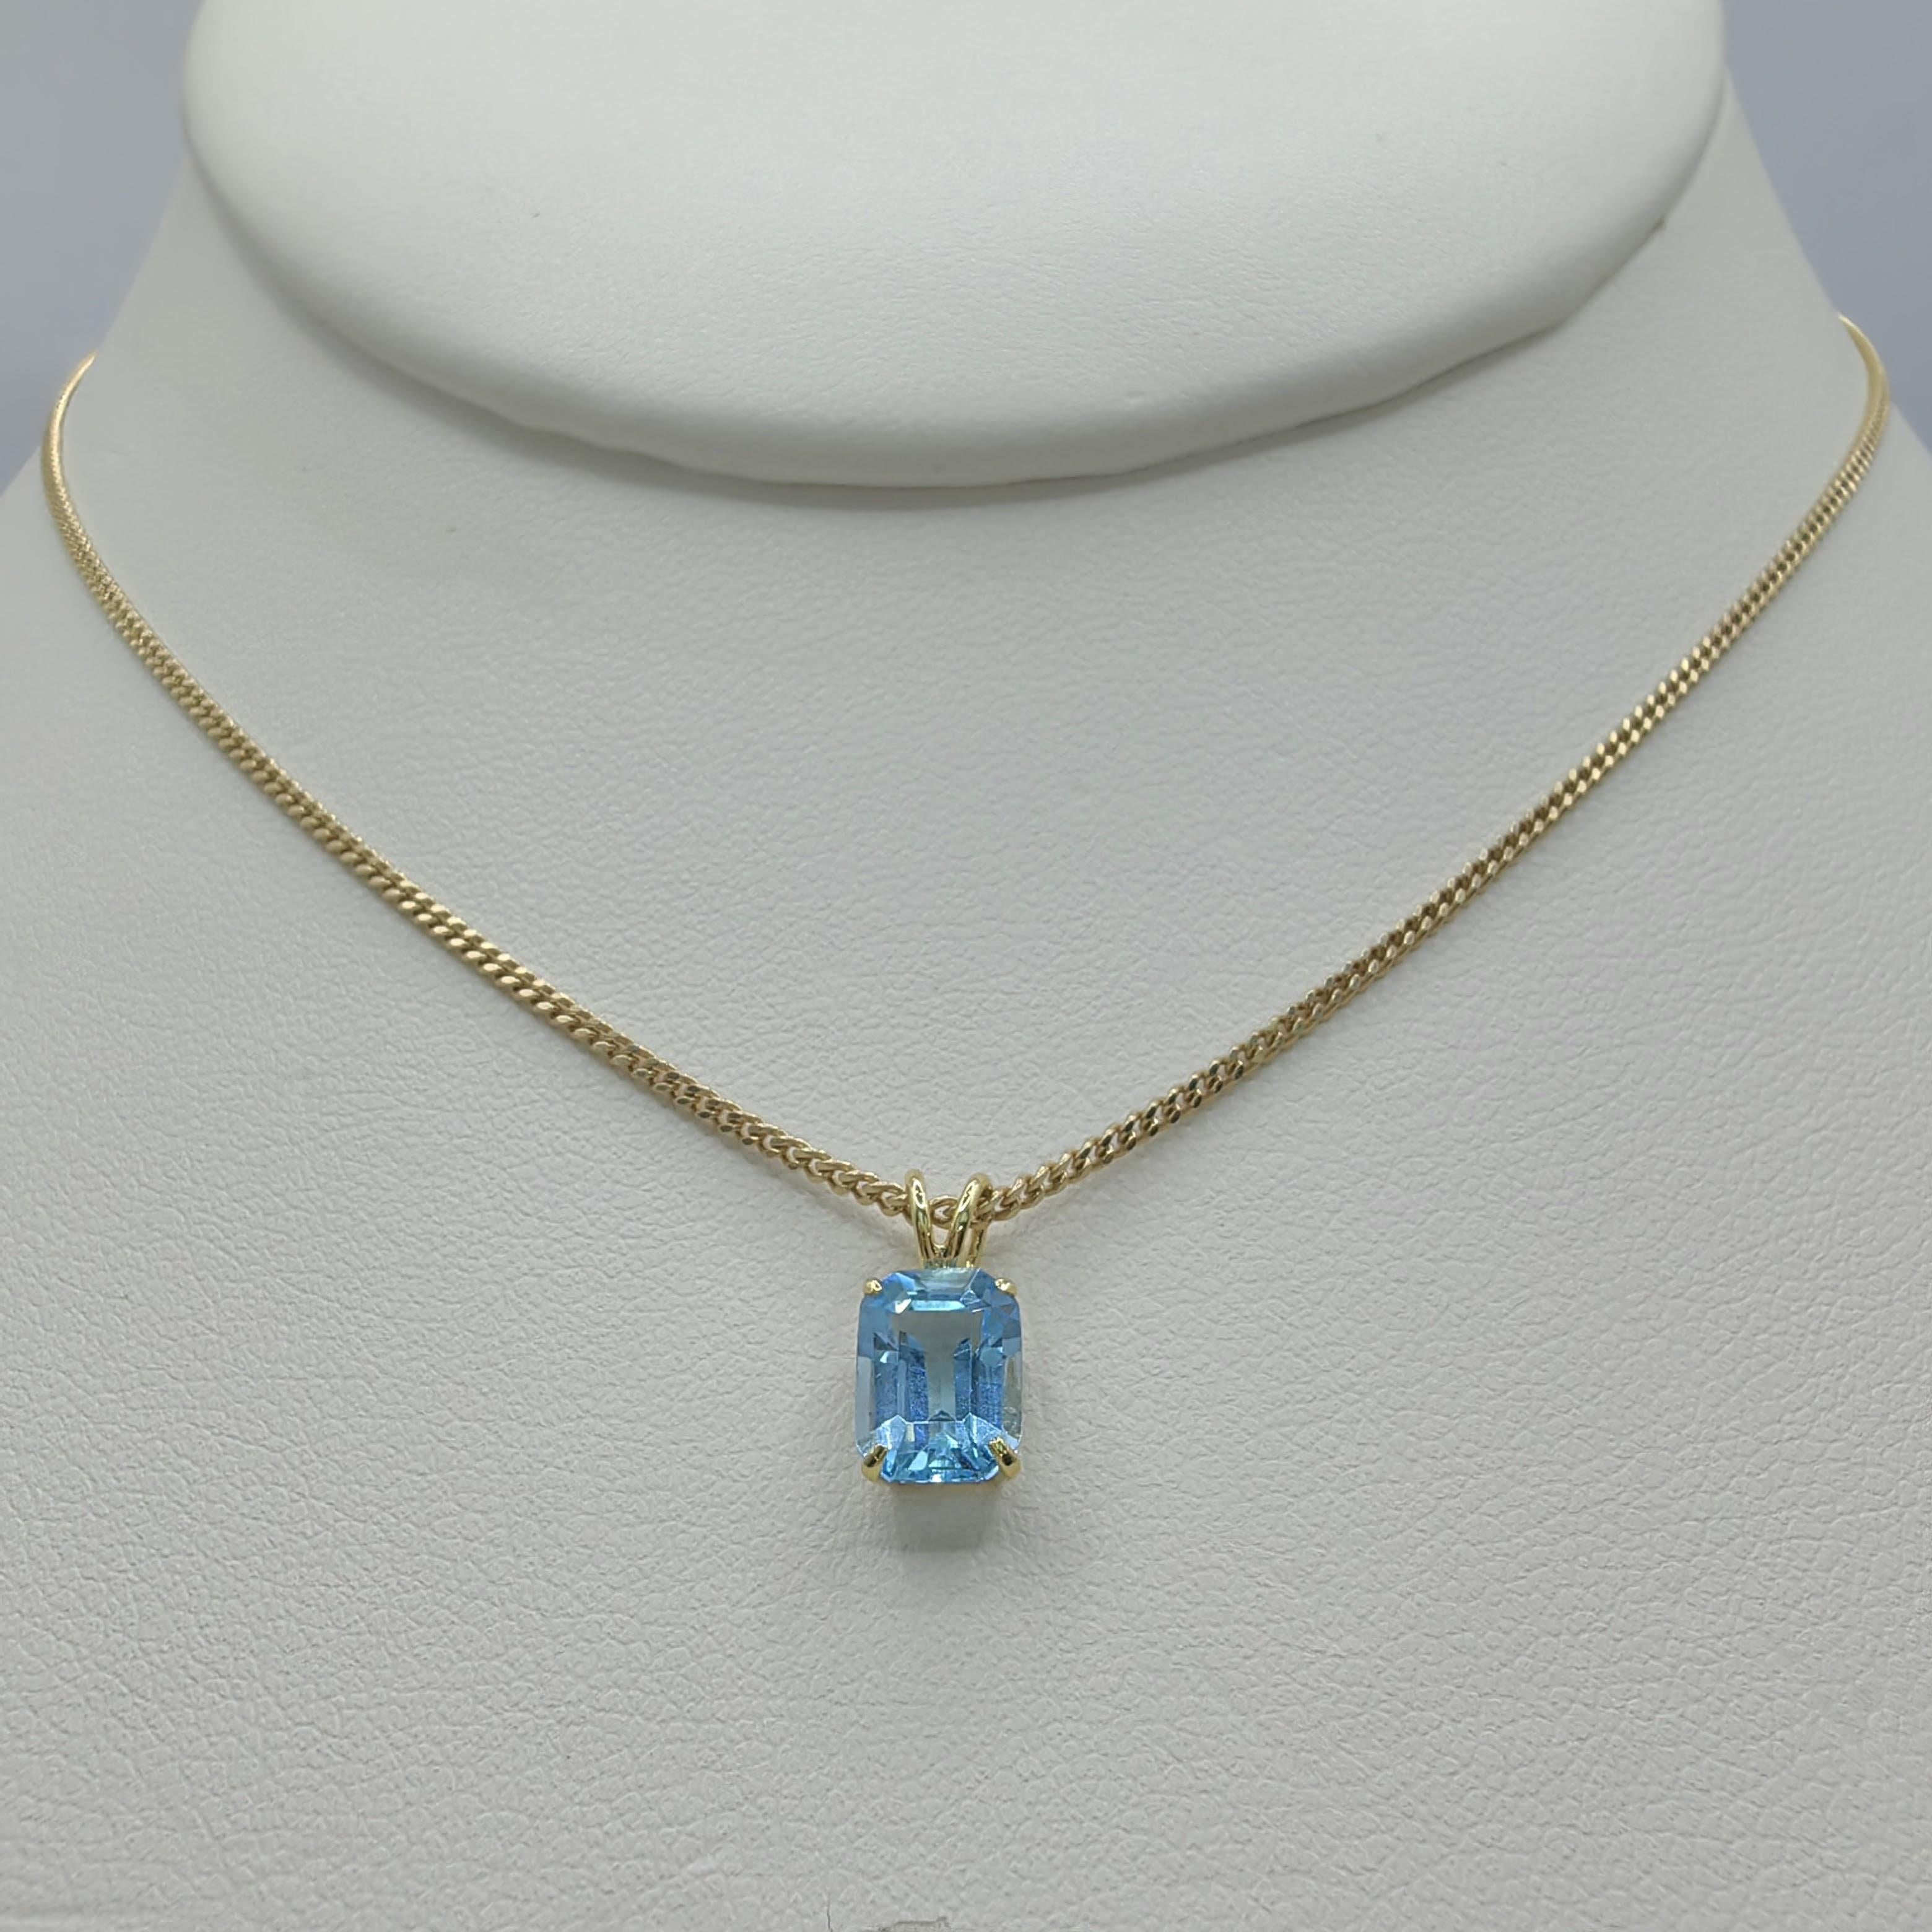 Introducing our Vintage 1980's Emerald Cut Blue Topaz Necklace Pendant in 14K Yellow Gold, a timeless piece that exudes elegance and sophistication. This exquisite pendant showcases an emerald cut blue topaz gemstone, measuring 7.79mm x 5.48mm, with